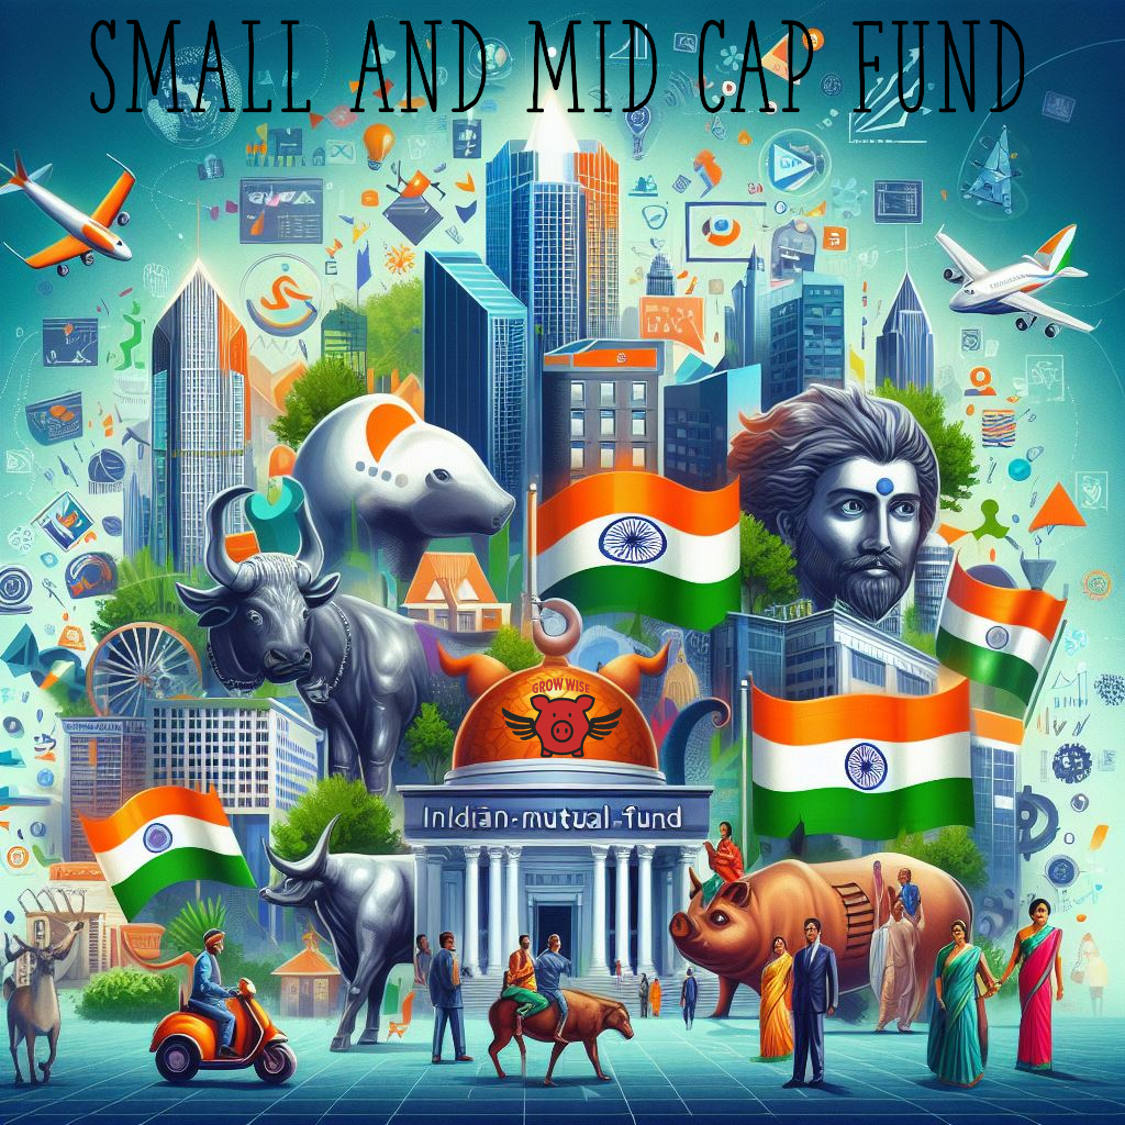 The Best 5 Midcap and Smallcap Mutual Funds in India